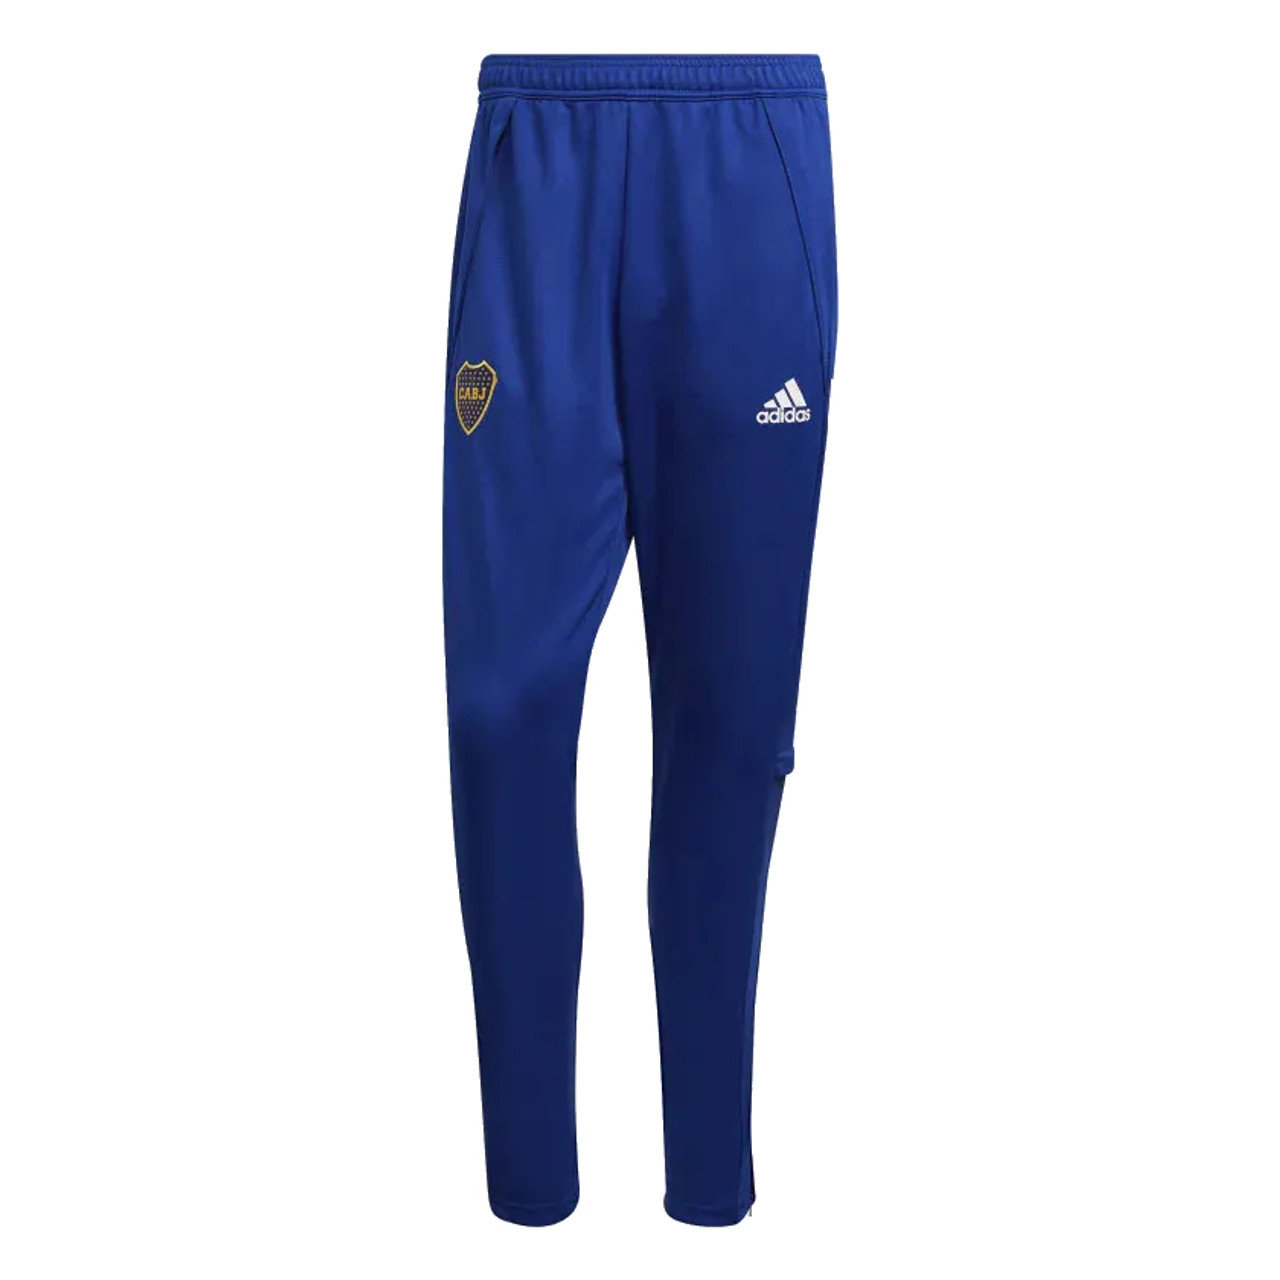 Adidas Juniors Training Pants 20-21- Adidas Official (various sizes available) Pampa Direct